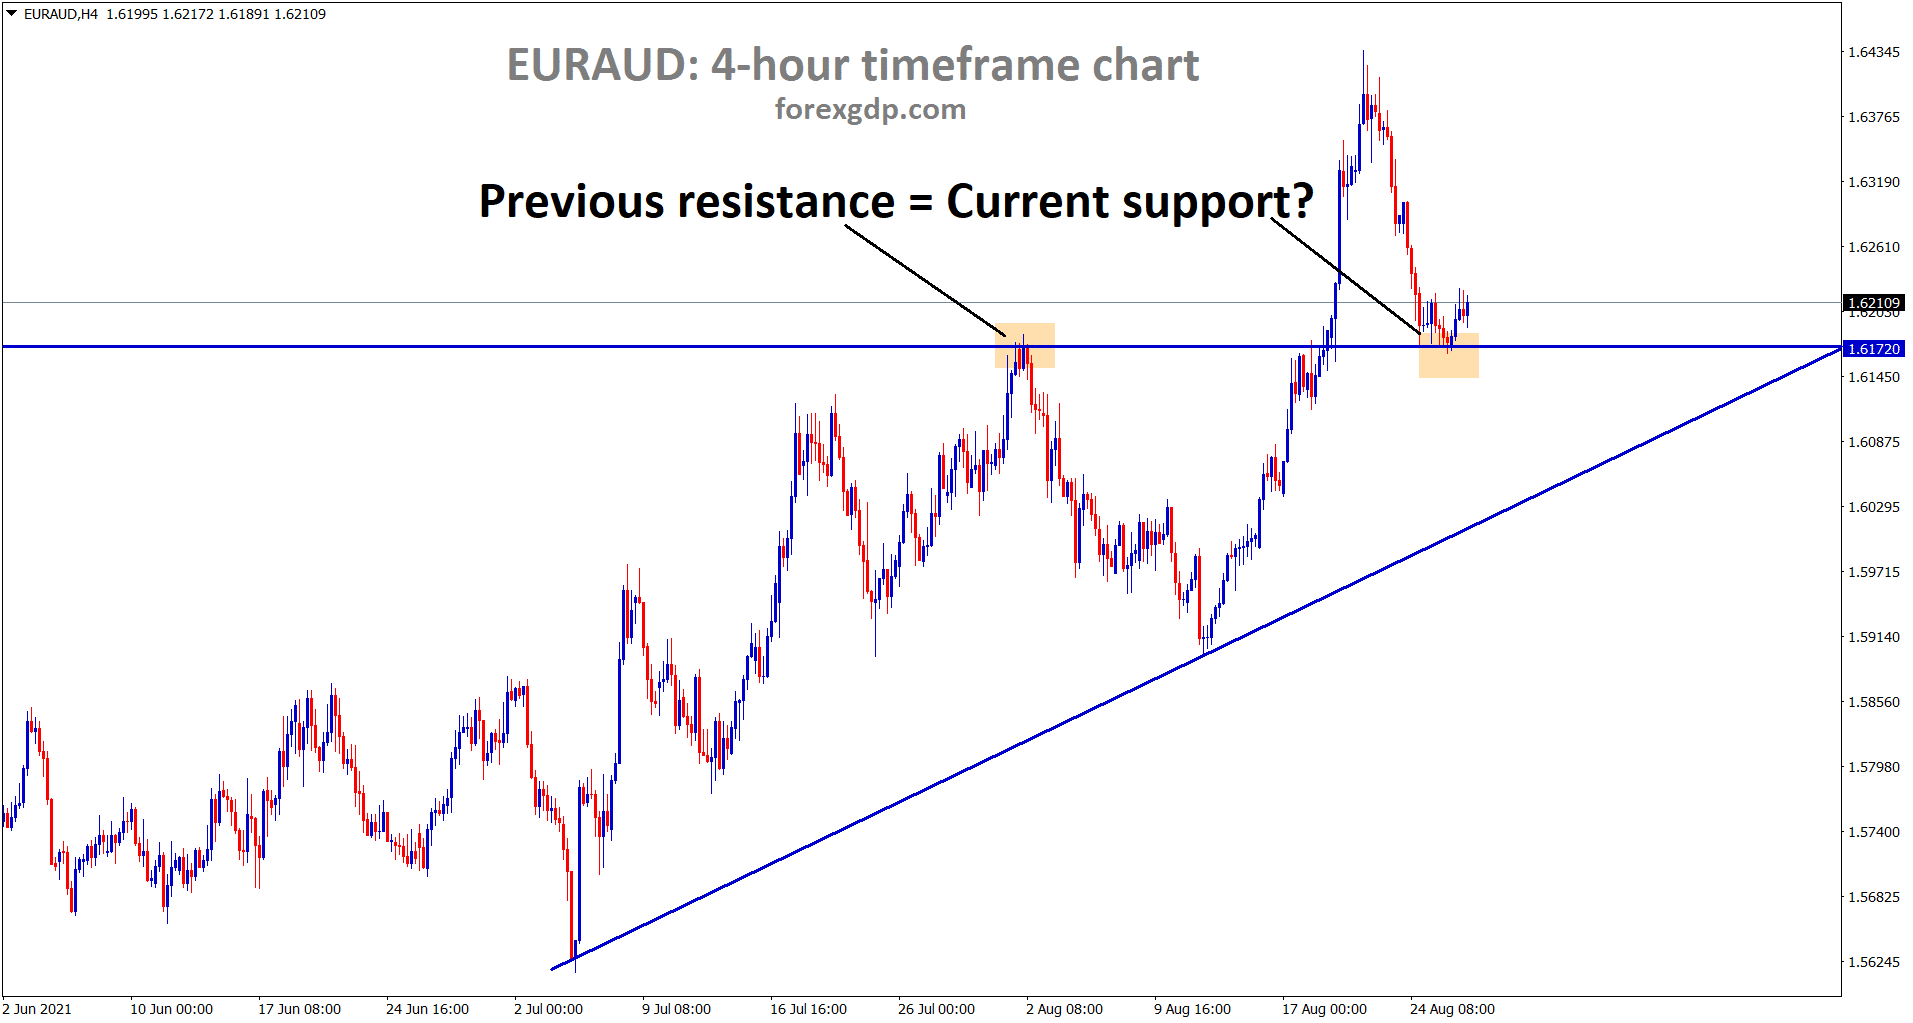 EURAUD is standing at the support area where previous resistance turn into support